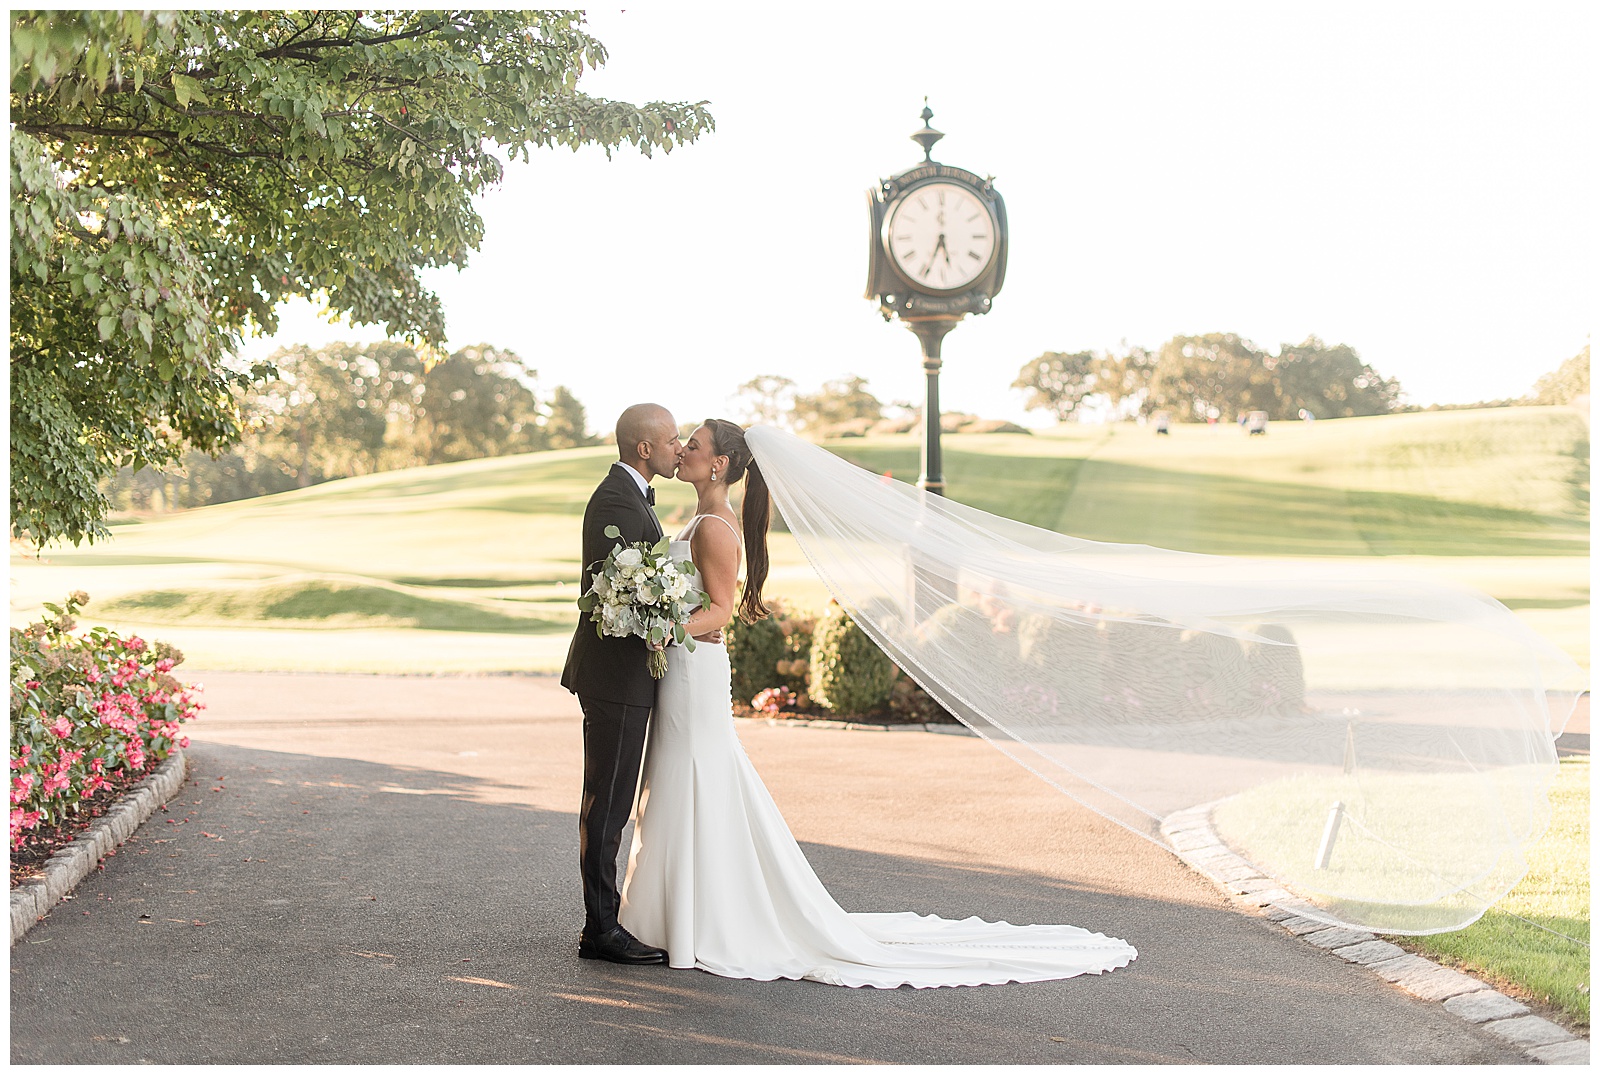 groom and bride kissing by unique clock at the north jersey country club with bride's long veil blowing behind her